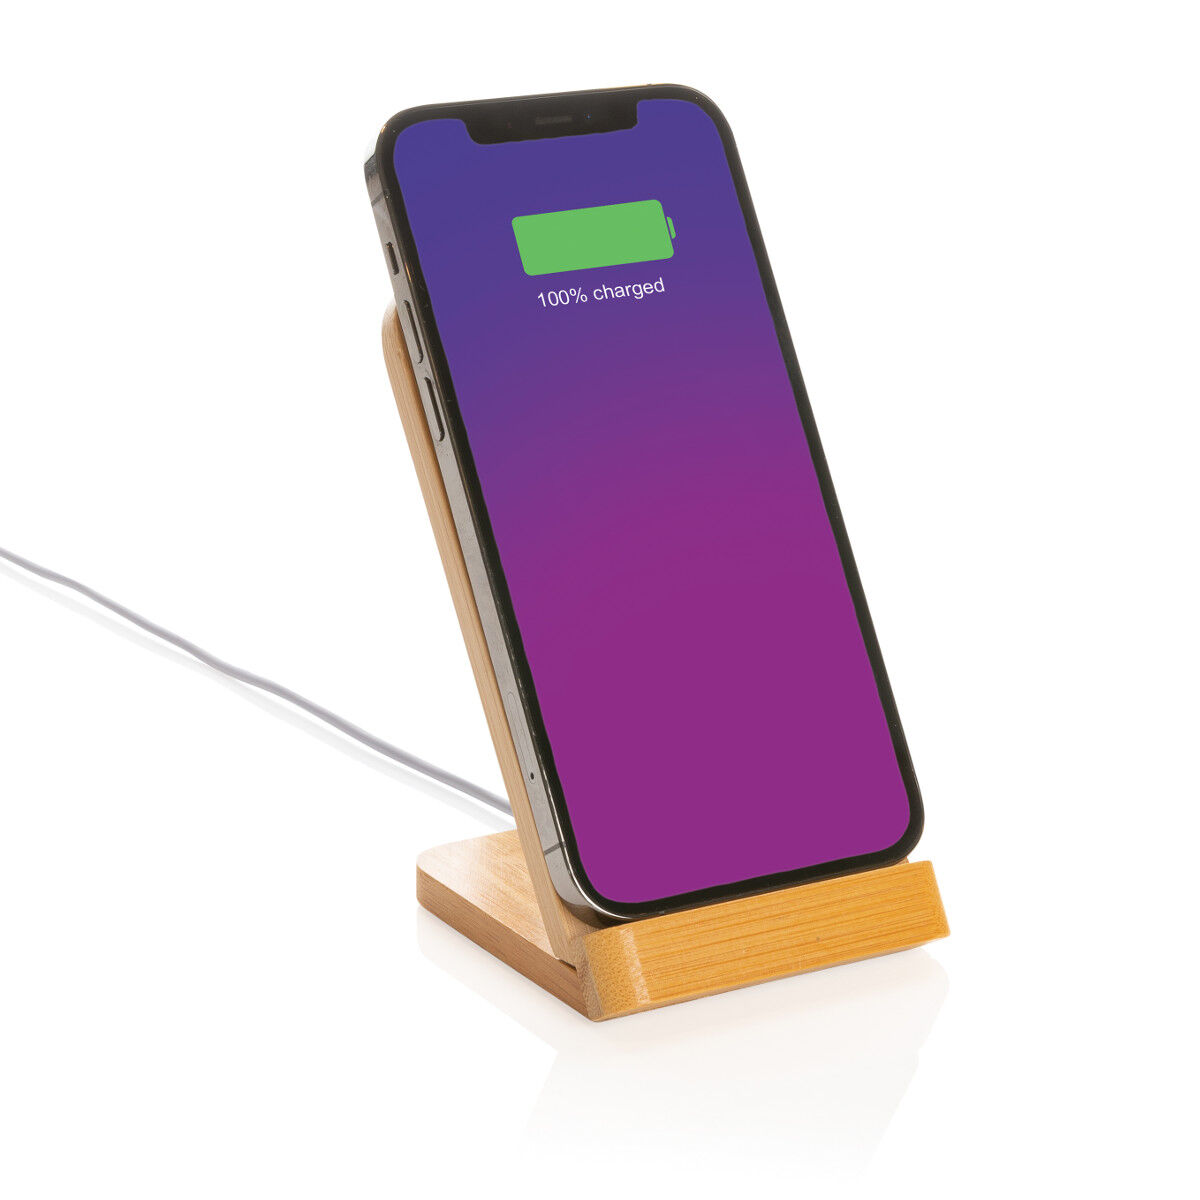 Bamboo 5W wireless charging stand (in use)